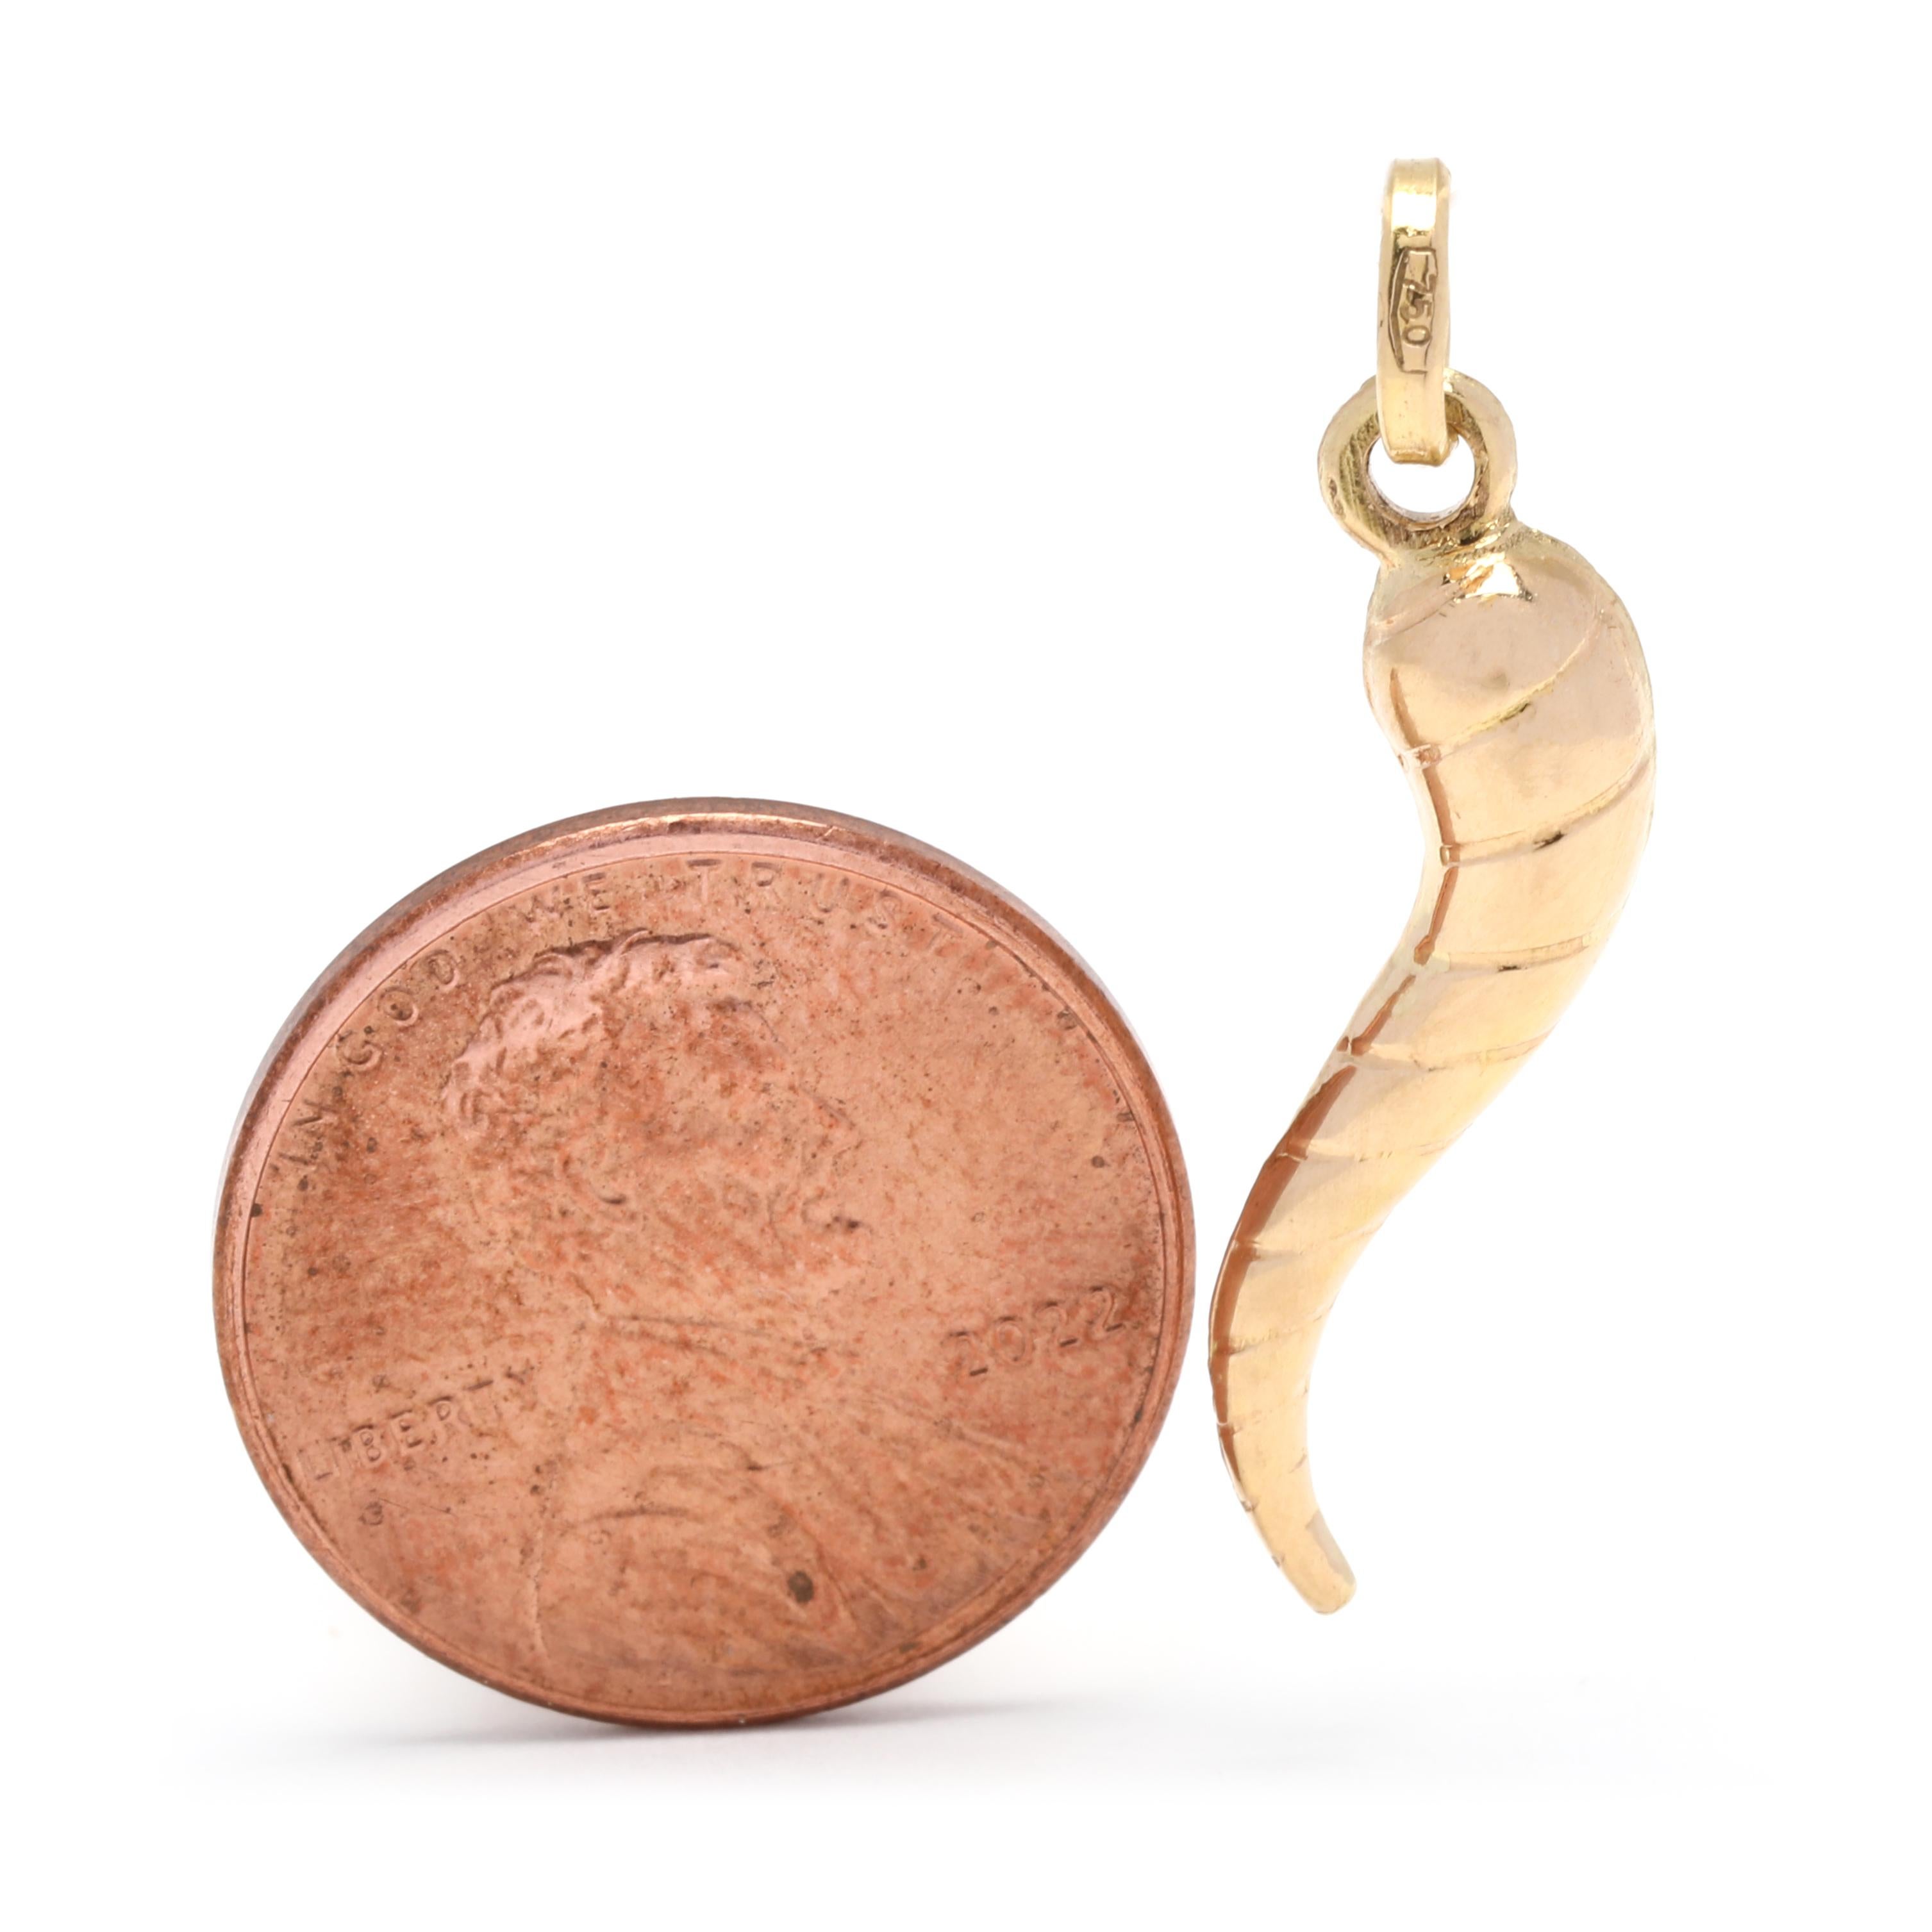 This beautiful Italian cornicello horn charm is made of 18K yellow gold and measures 1 1/8 inch in length. This charm is traditionally believed to bring luck and good fortune to its wearer. The elegant cable design adds a touch of sophistication to